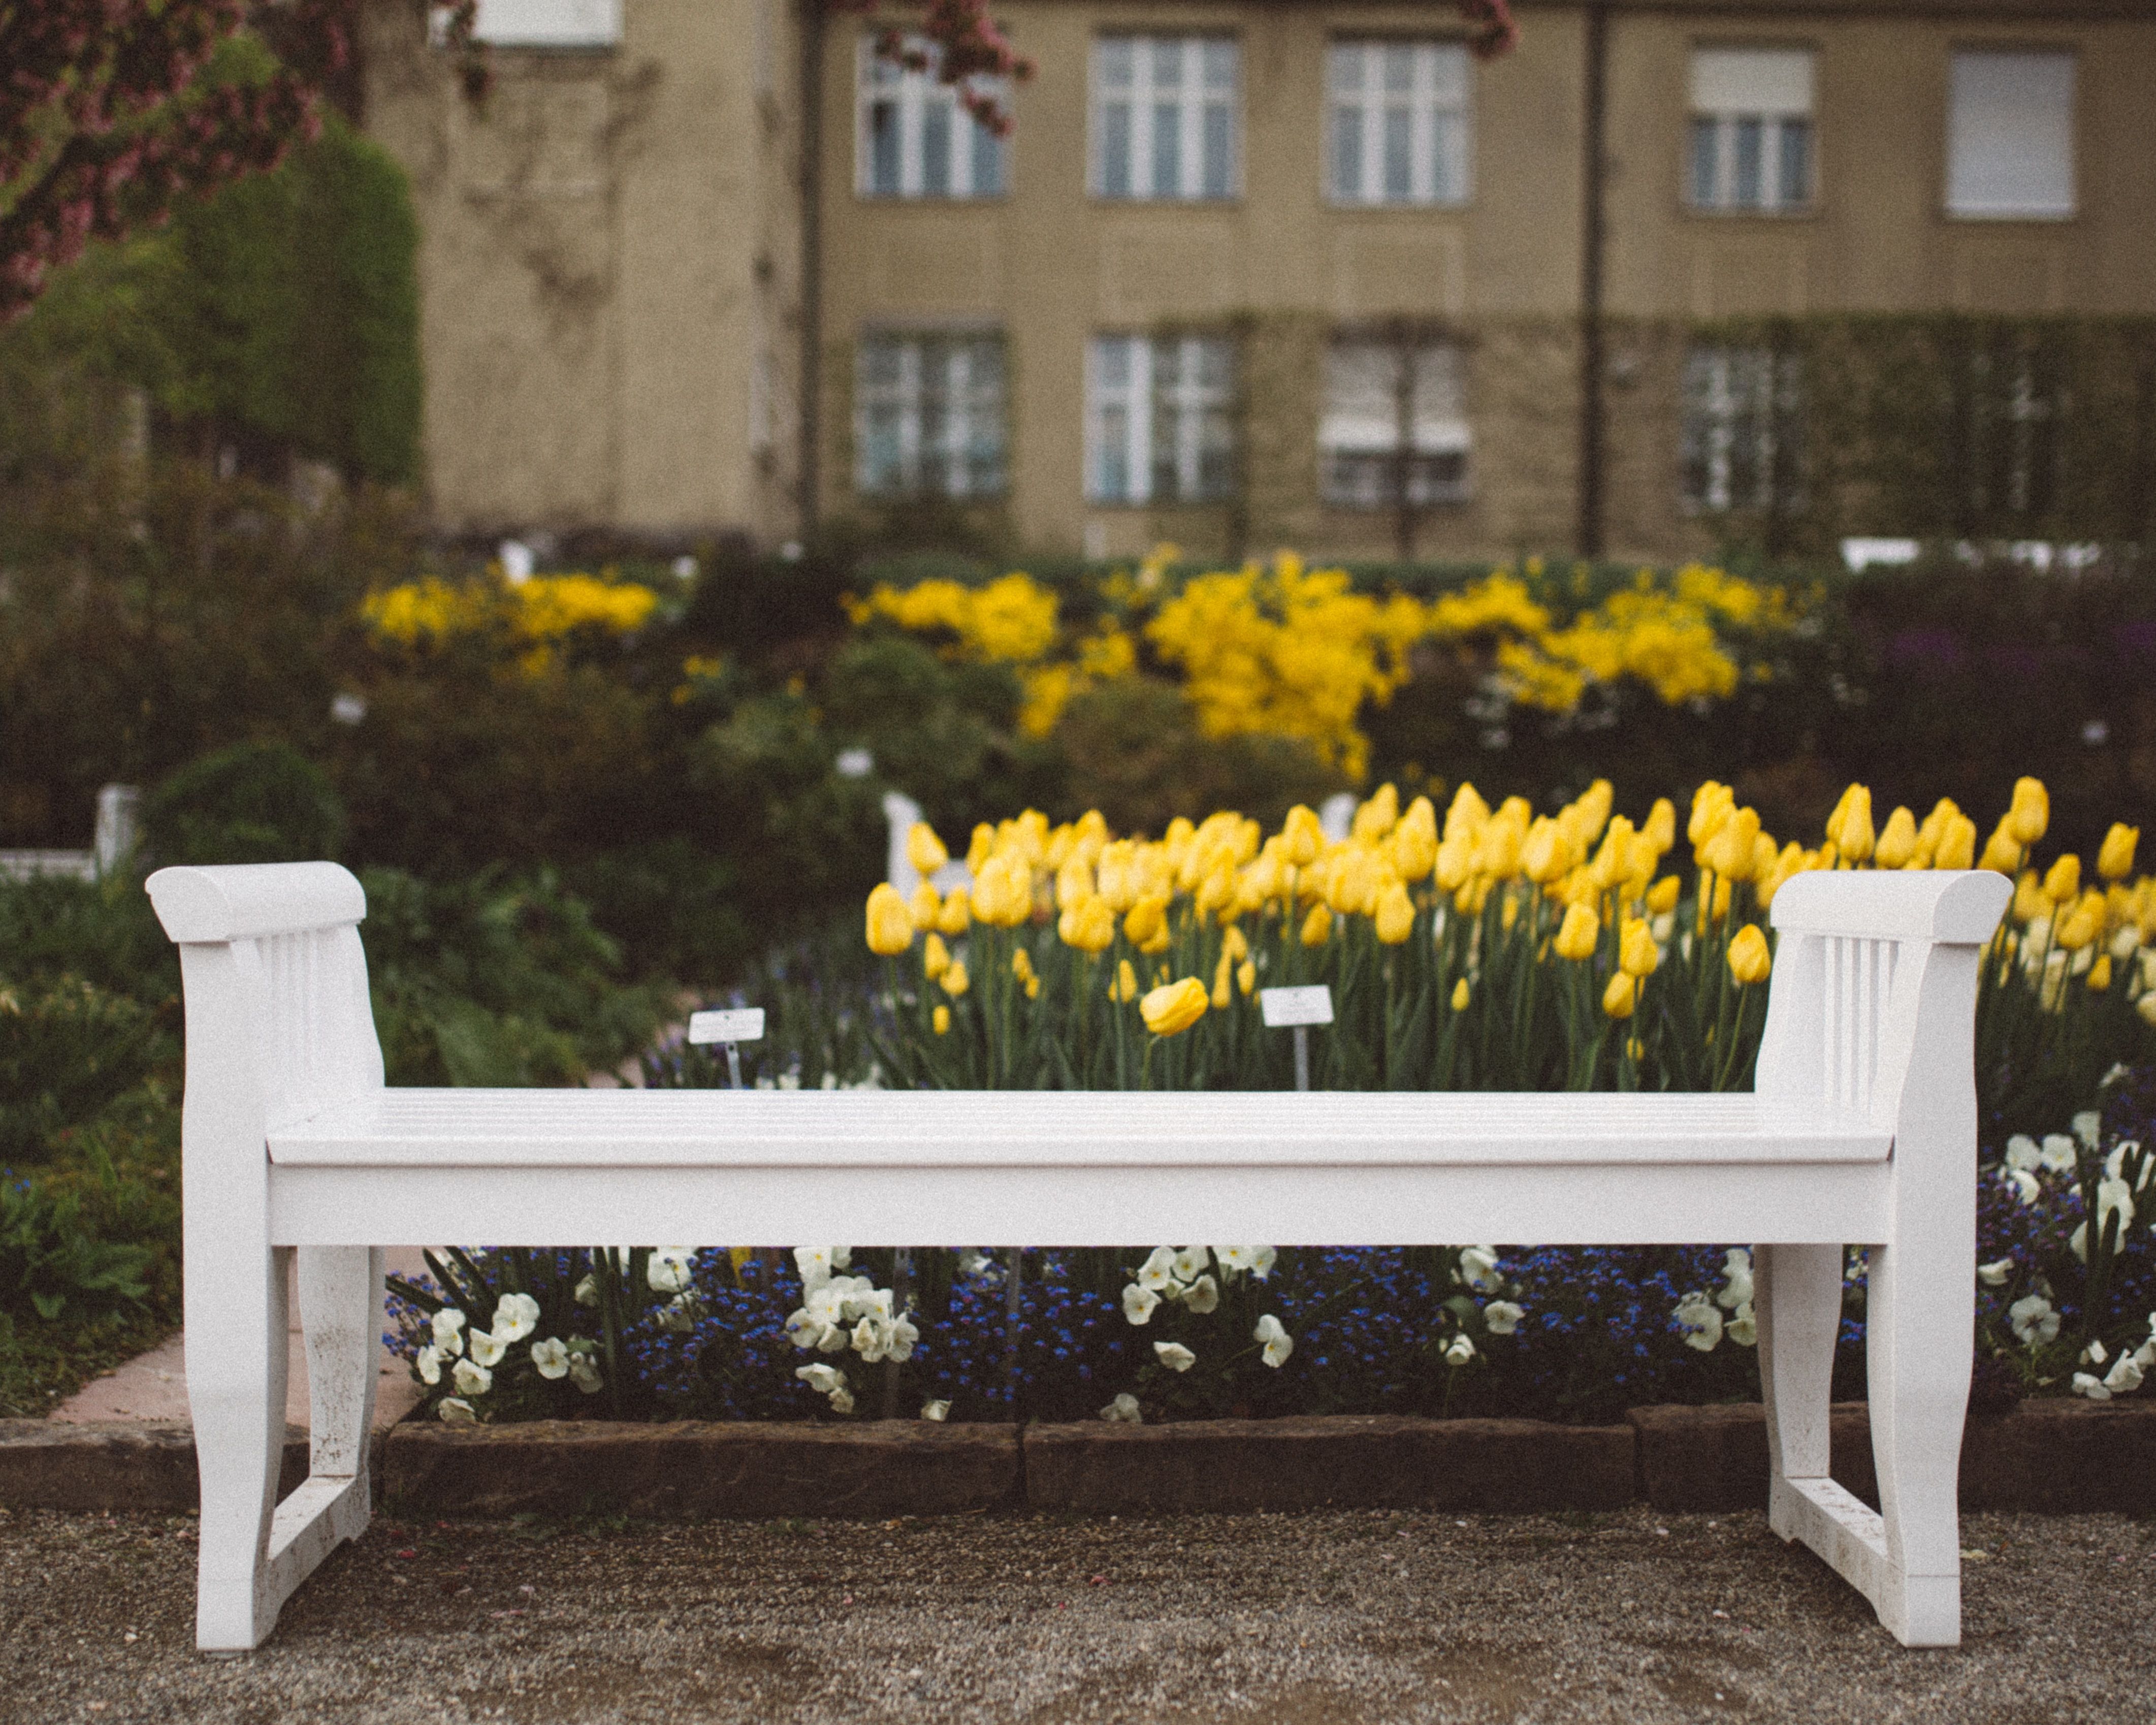 White plastic bench in front of the yellow flowers